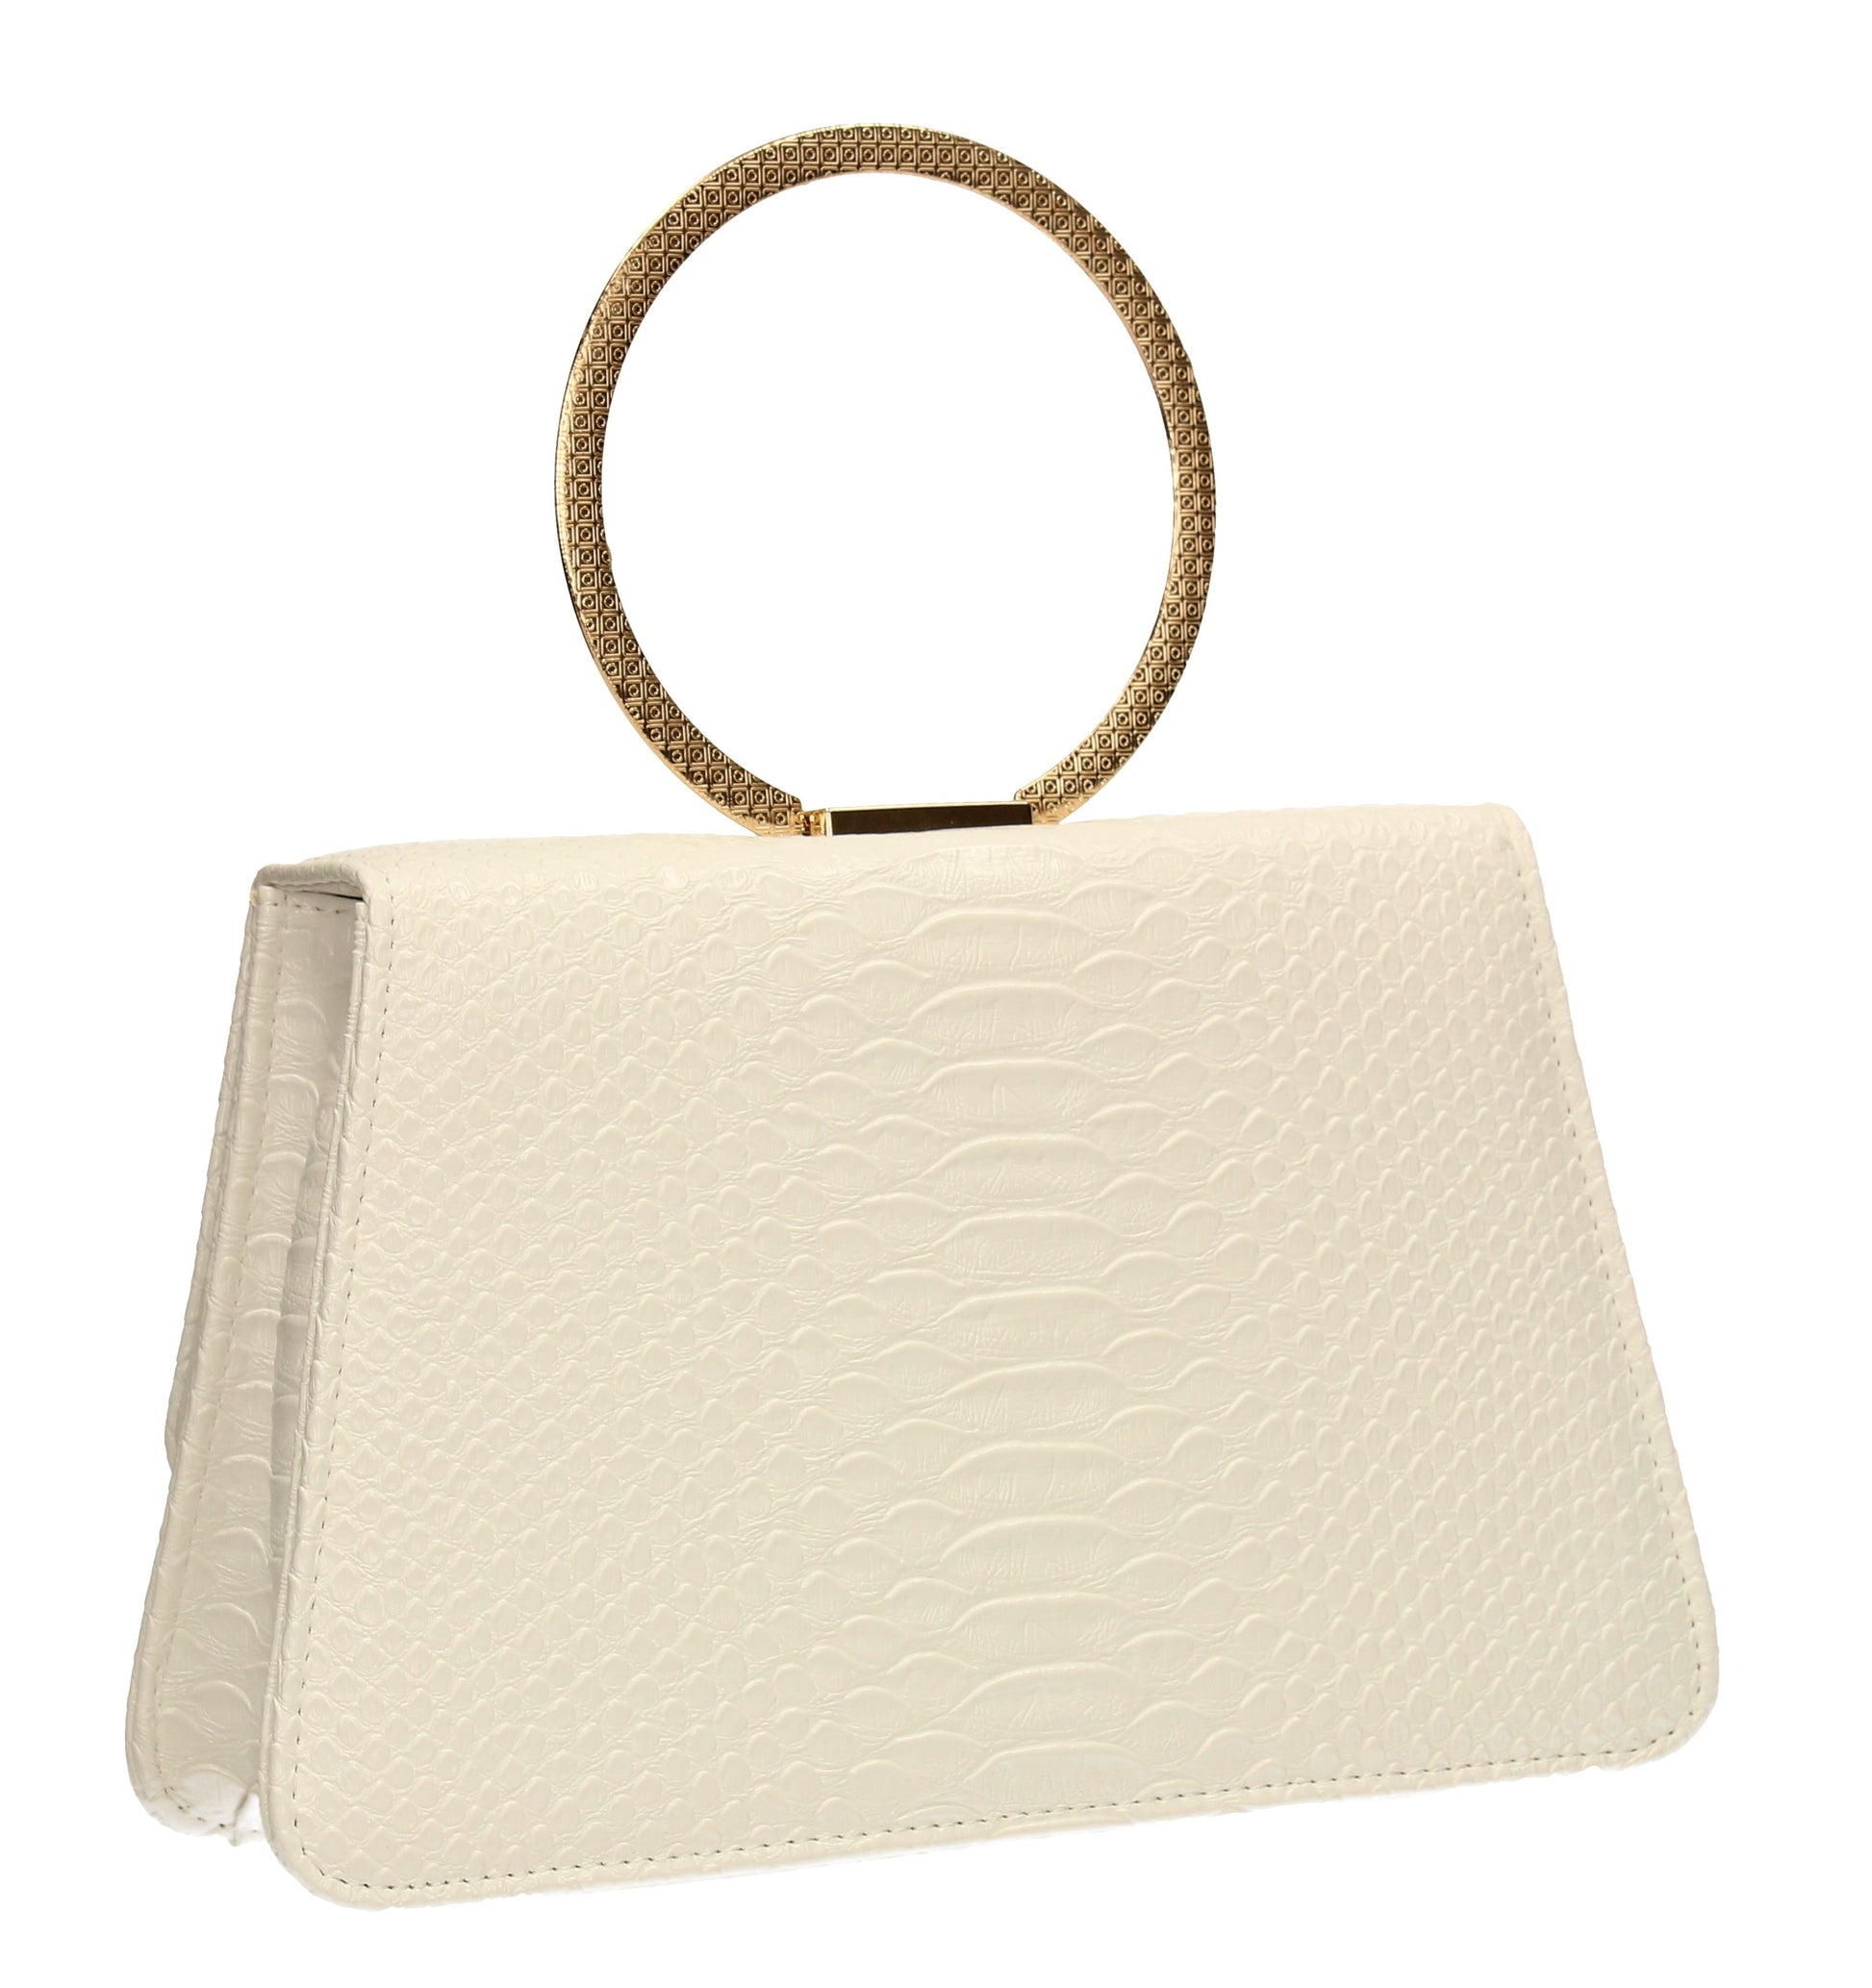 SWANKYSWANS Piper Clutch Bag White Cute Cheap Clutch Bag For Weddings School and Work